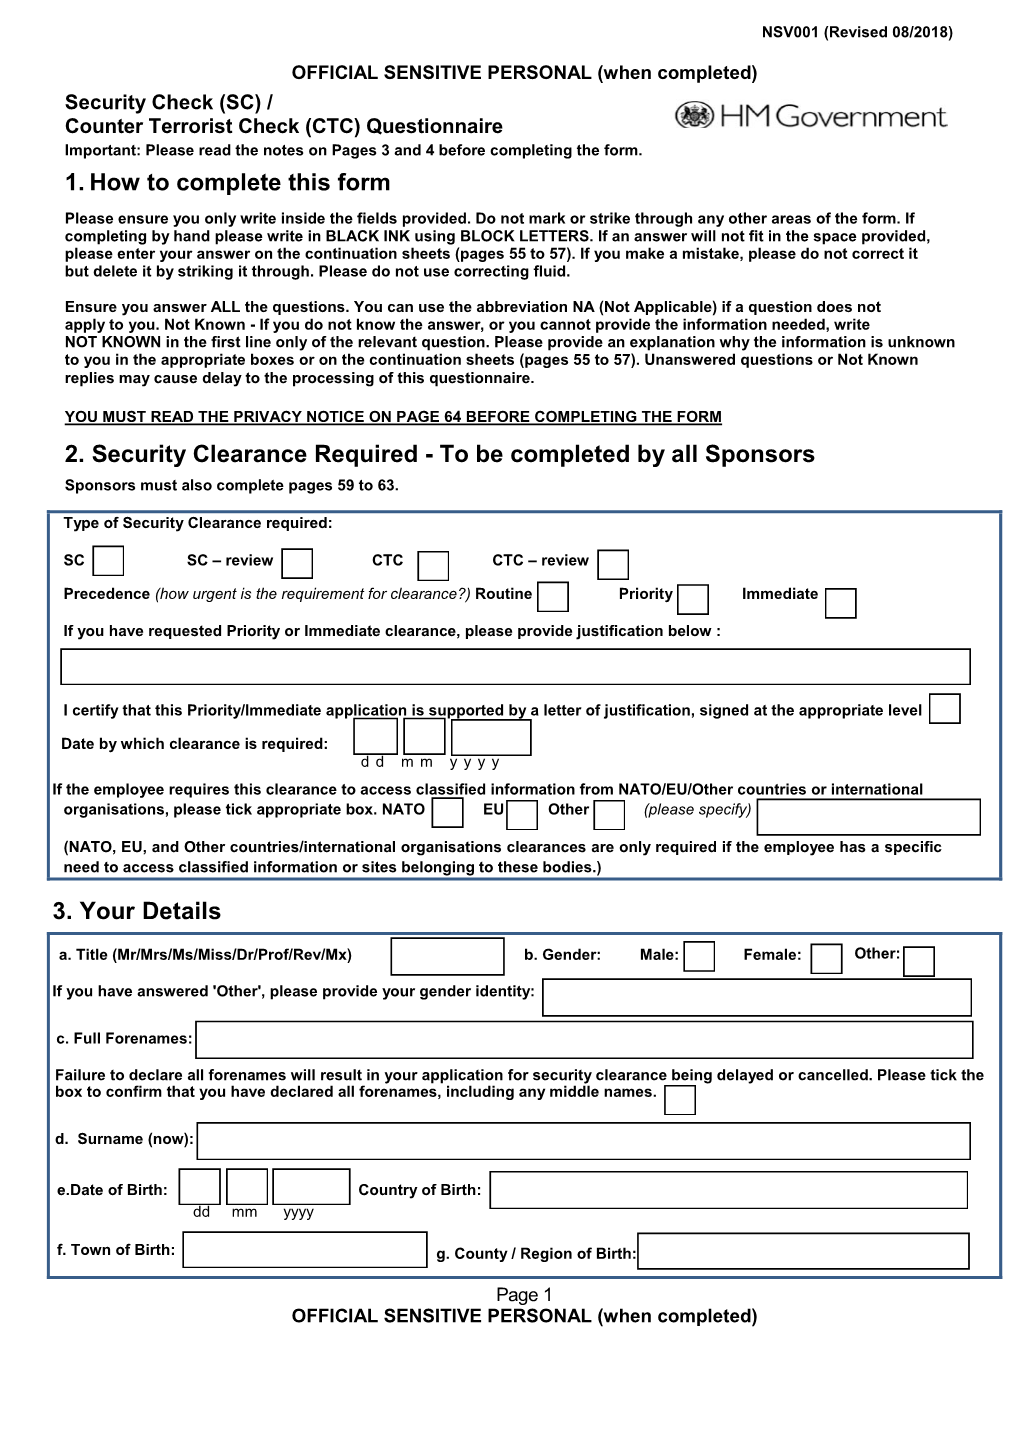 1. How to Complete This Form 2. Security Clearance Required